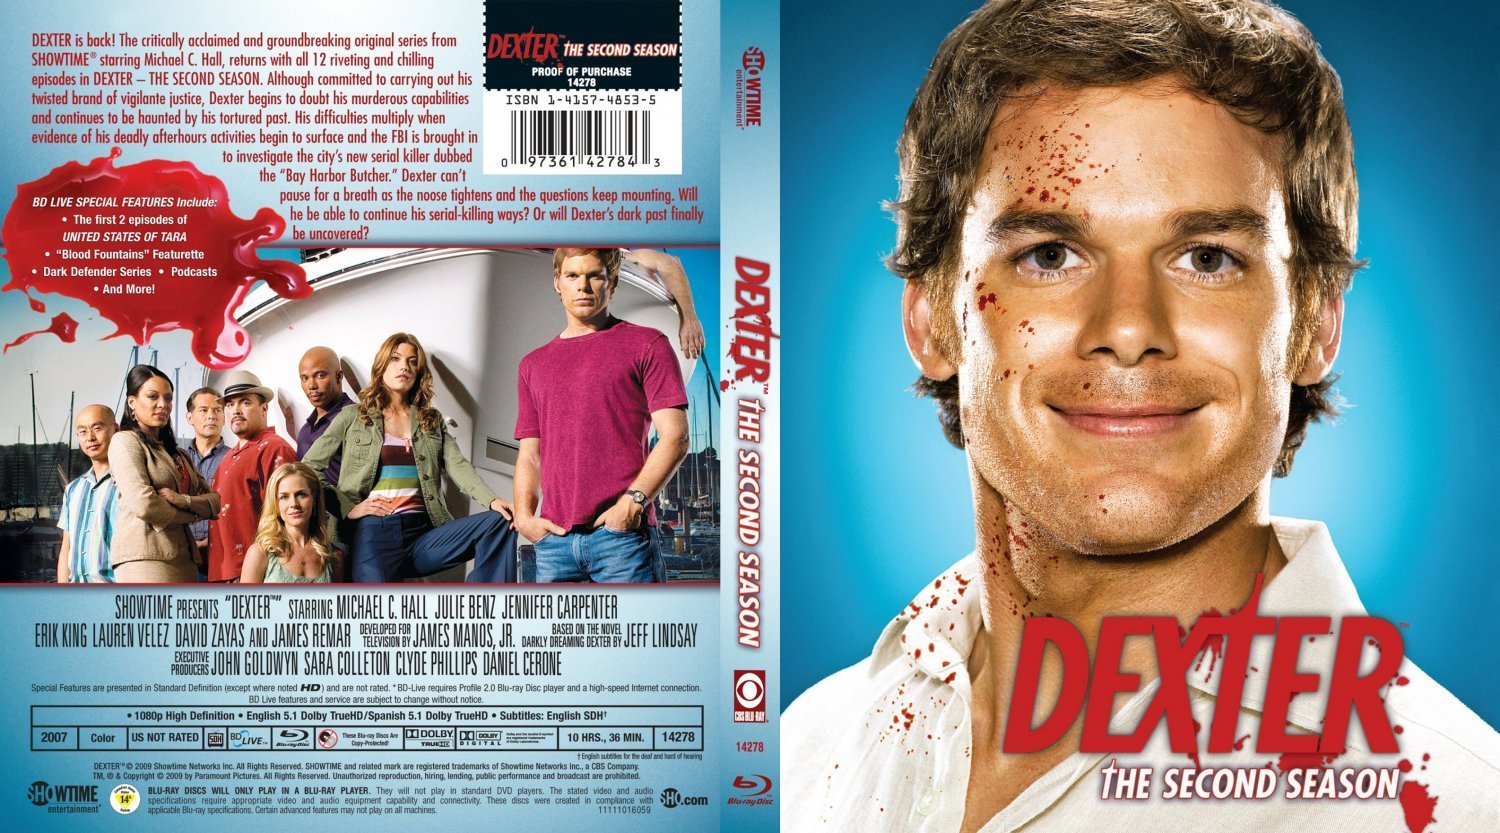 Dexter Season Scan Blu Ray Covers Cover Century Over Album Art Covers For Free